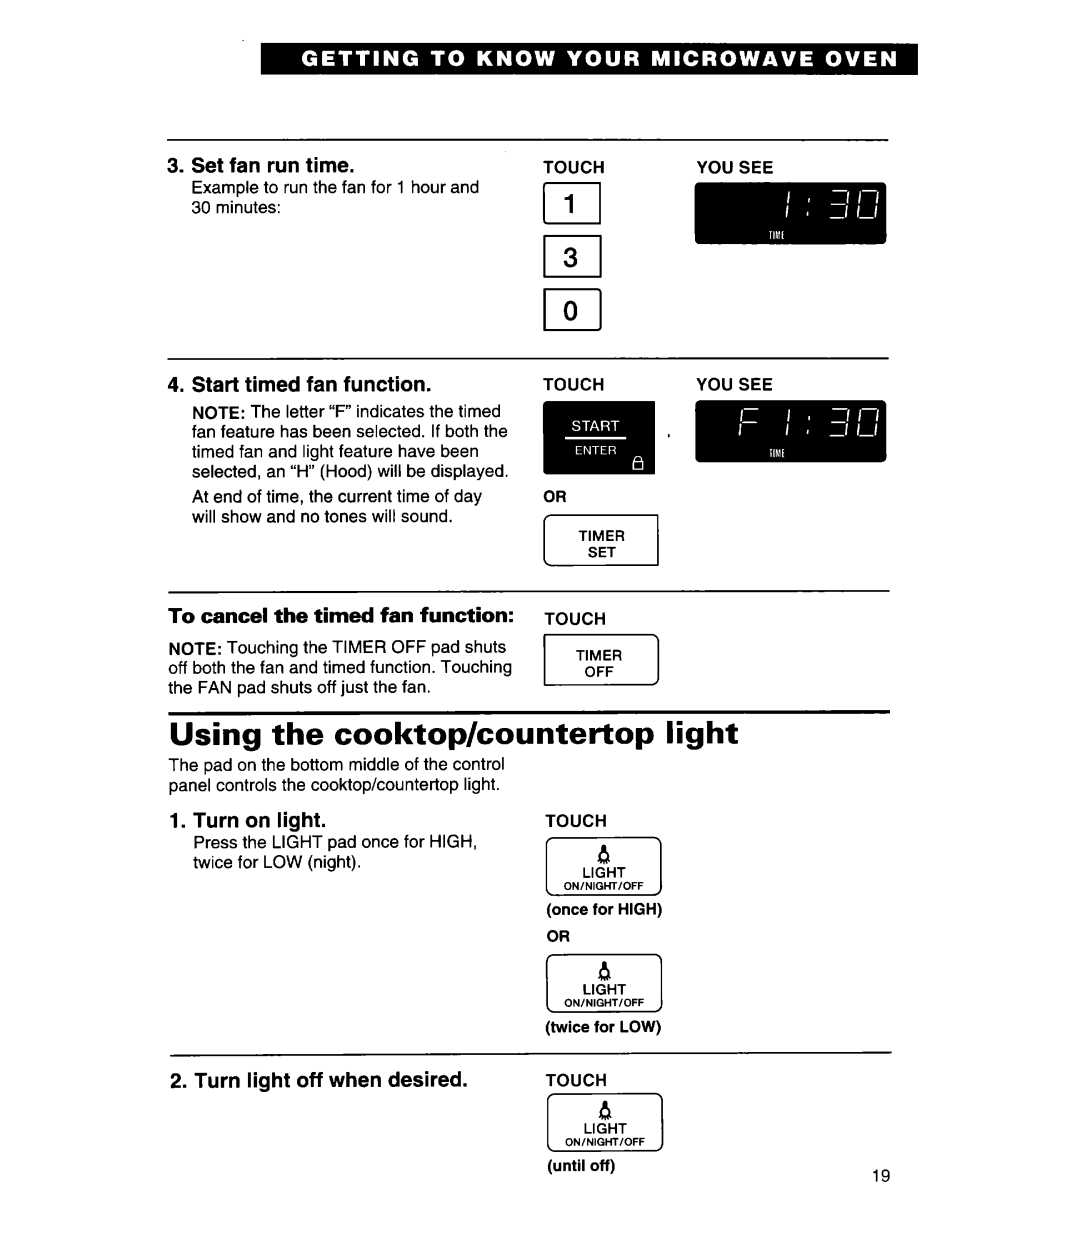 Whirlpool MH7130XE Using the cooktop/countertop light, Set fan run time, Start timed fan function, Turn on light, Touch 